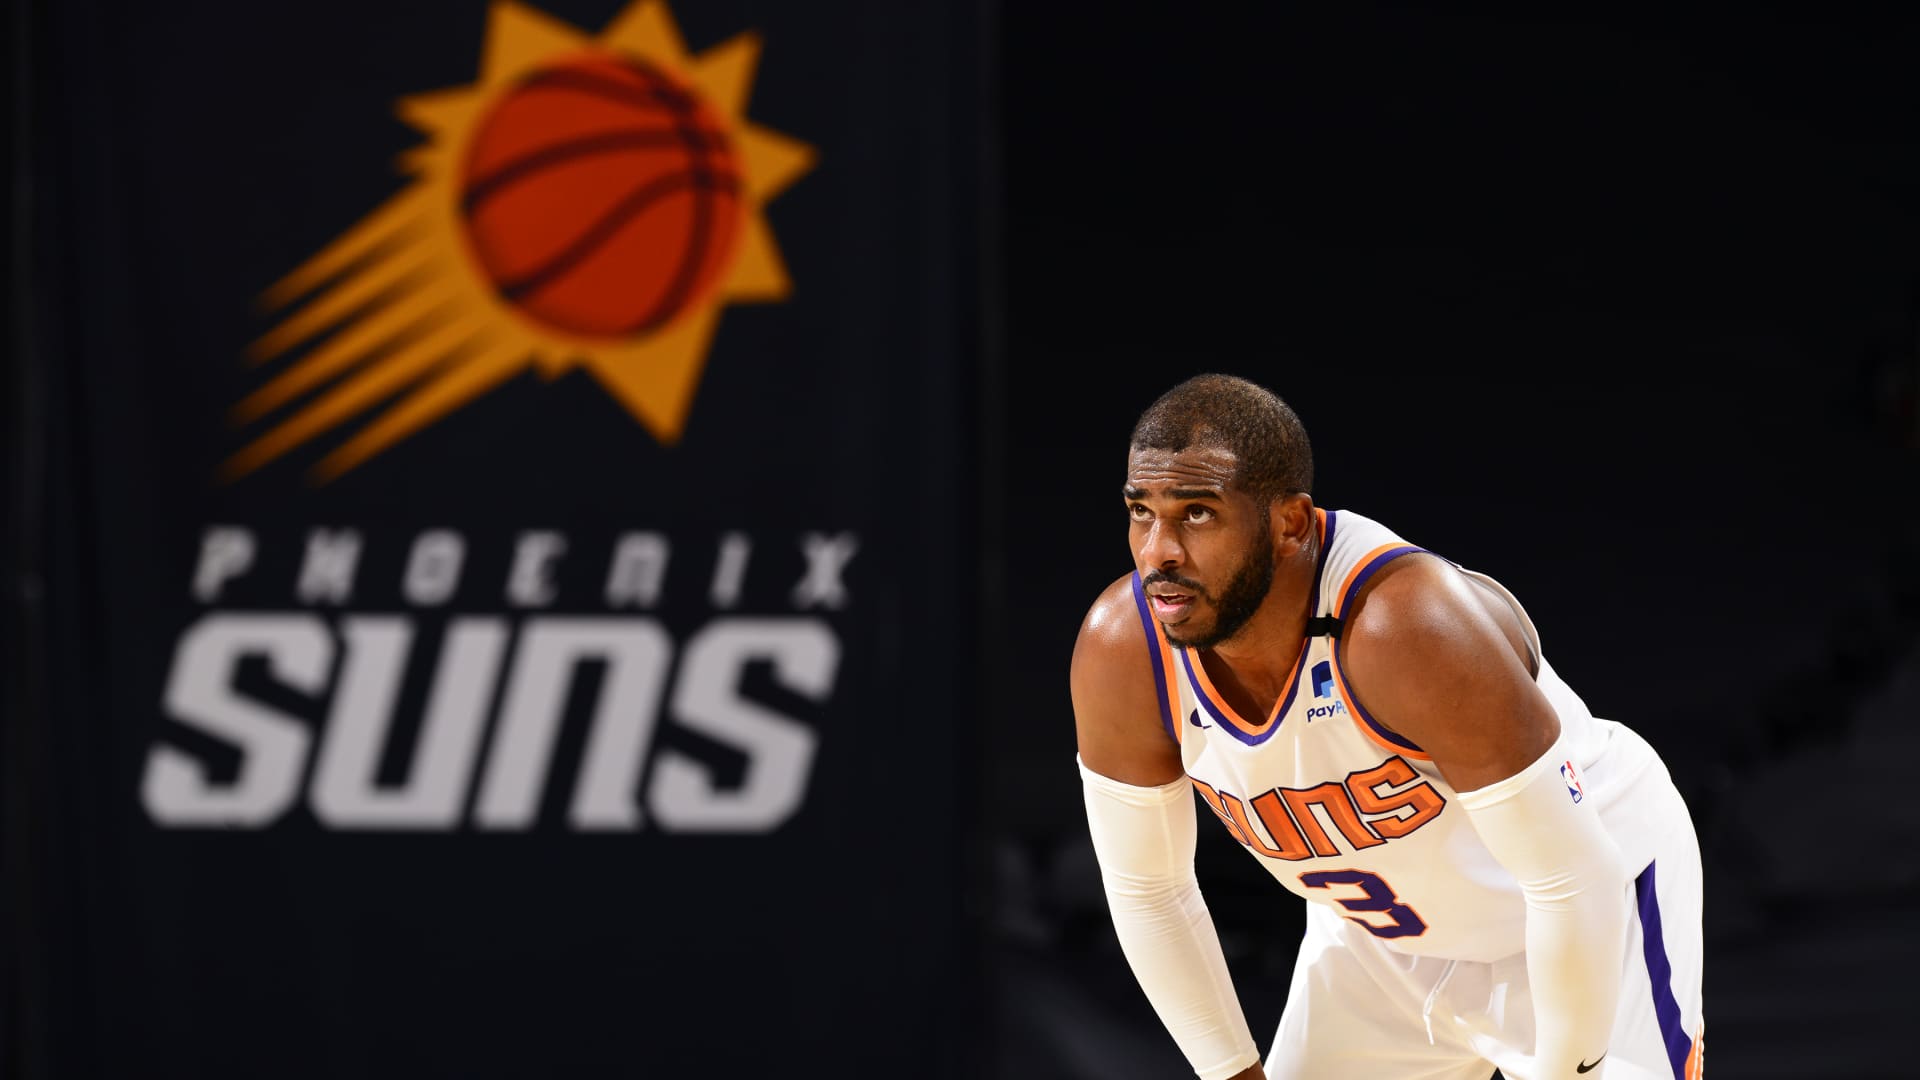 Chris Paul #3 of the Phoenix Suns looks on during the game against the Oklahoma City Thunder on January 27, 2021 at Talking Stick Resort Arena in Phoenix, Arizona.